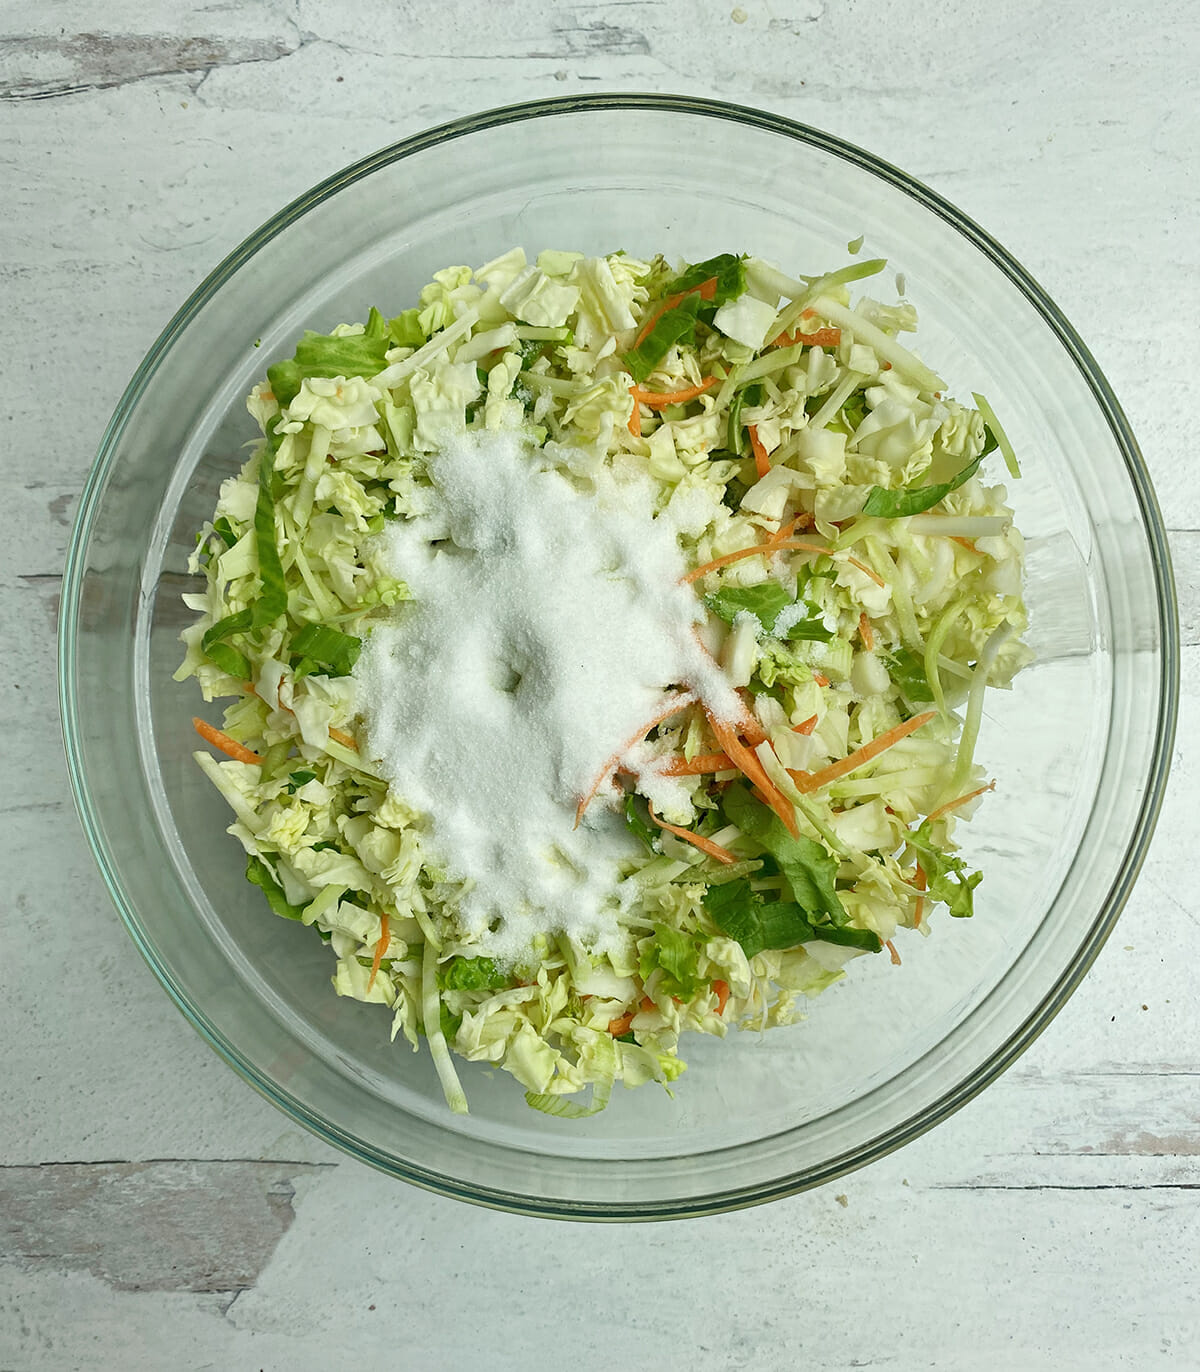 coleslaw mixture with sugar and salt in bowl.